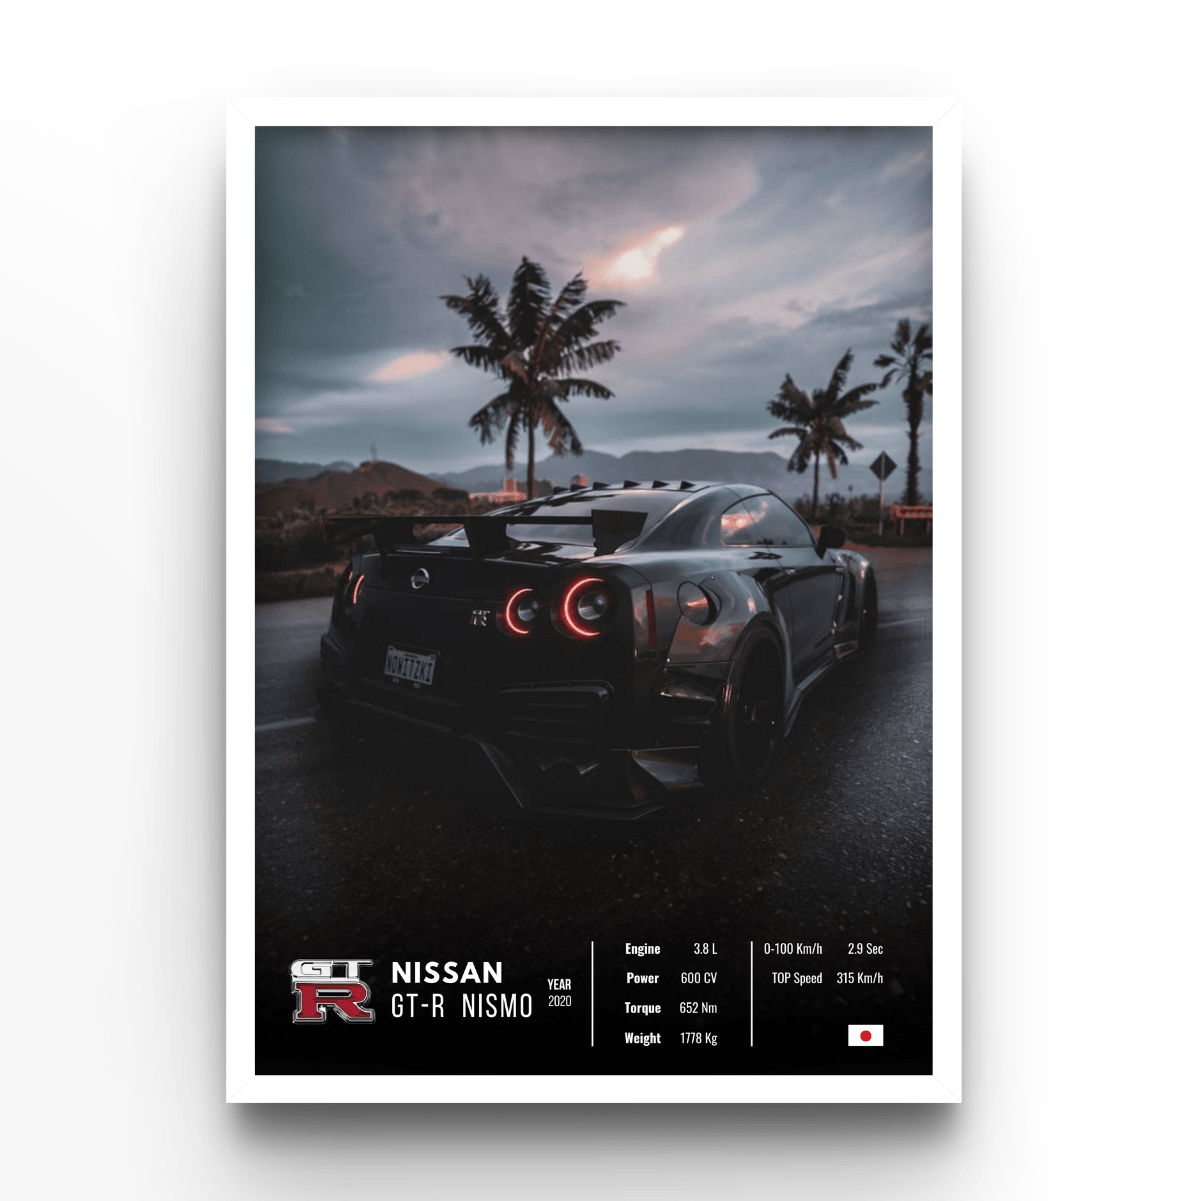 Nissan GT-R Nismo Collector - A4, A3, A2 Posters Base - Poster Print Shop / Art Prints / PostersBase